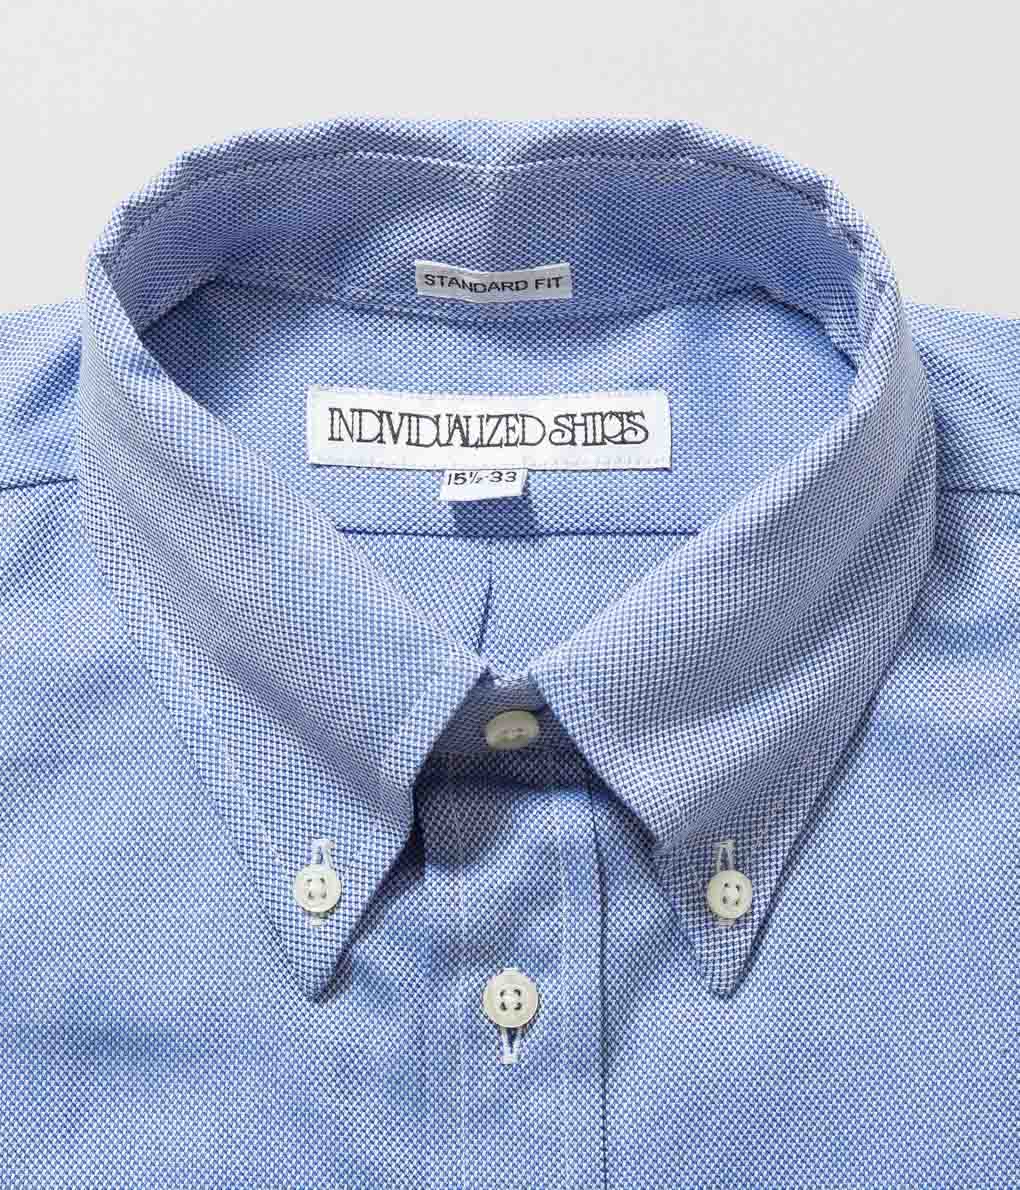 INDIVIDUALIZED SHIRTS "ROYAL OXFORD (STANDARD FIT BUTTON DOWN SHIRT)" (BLUE)